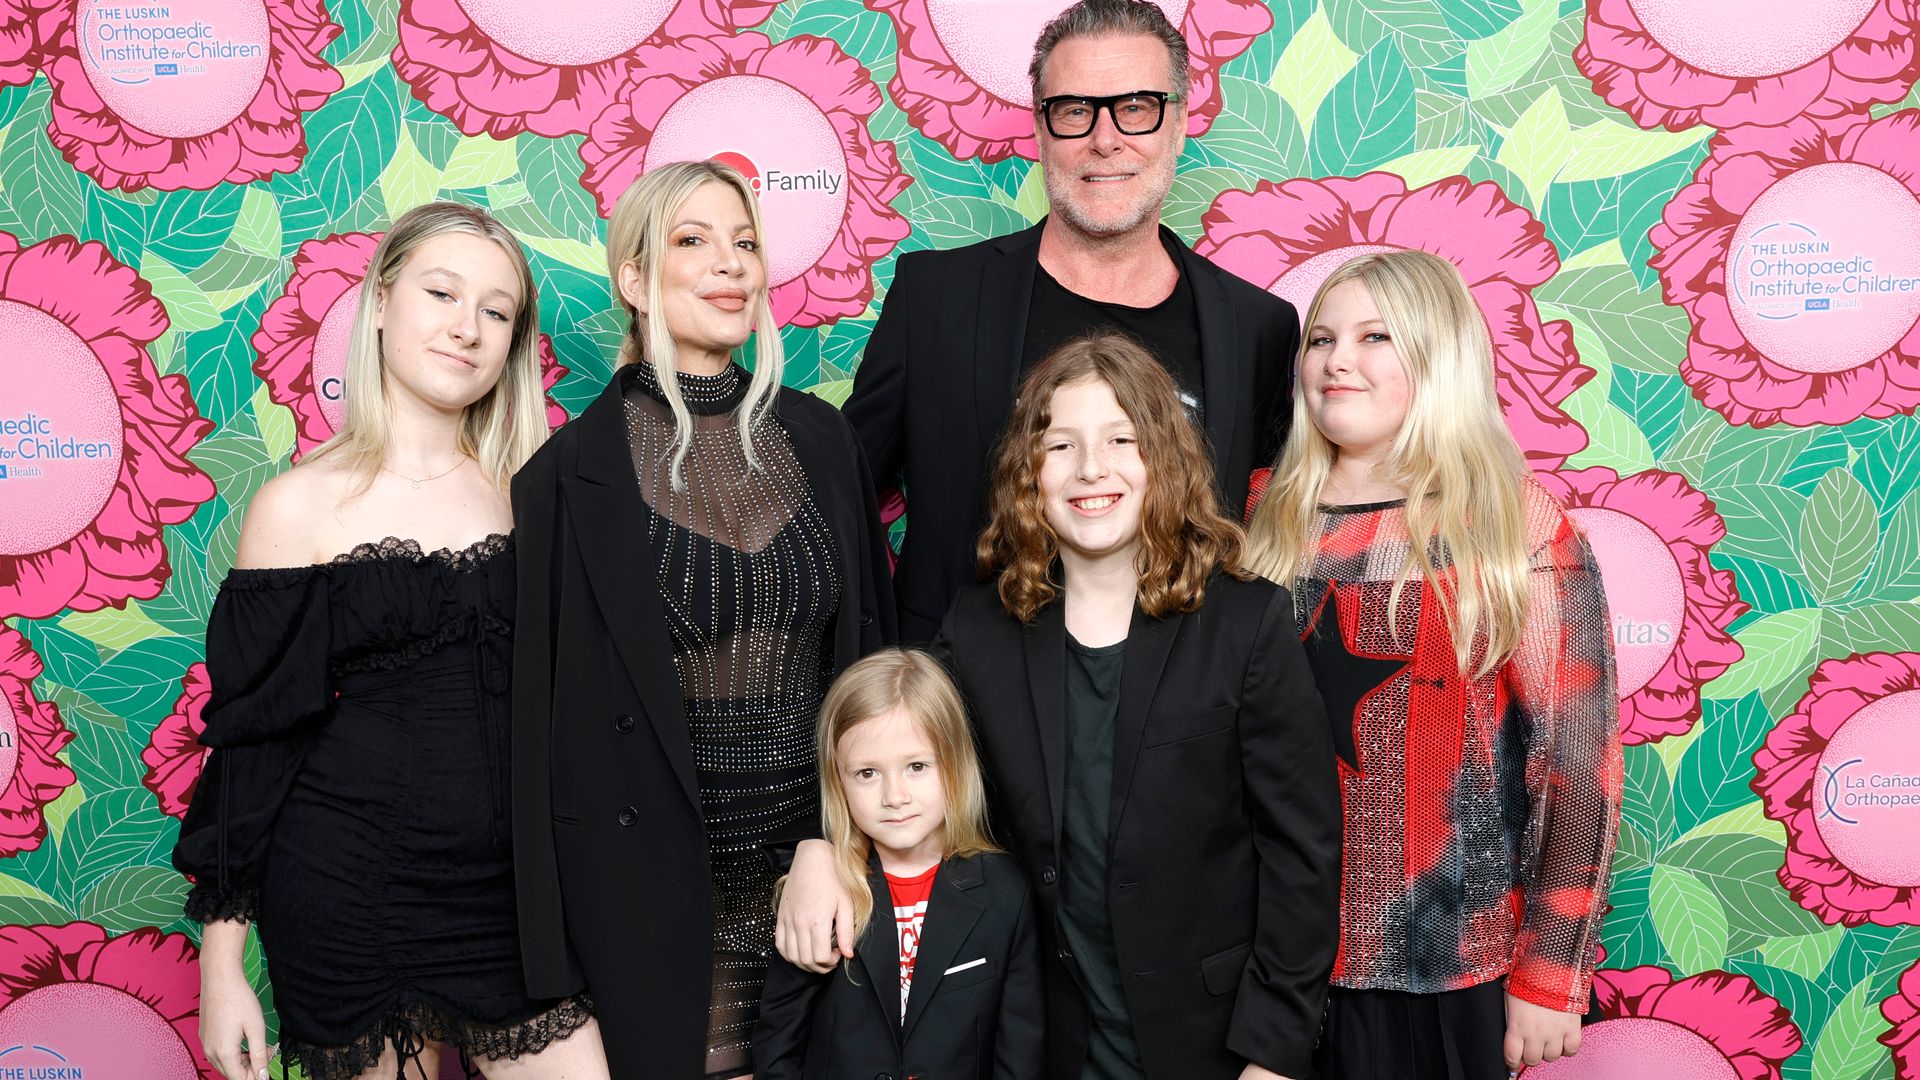 Tori Spelling and Dean McDermott fight over custody of their kids as divorce turns contentious